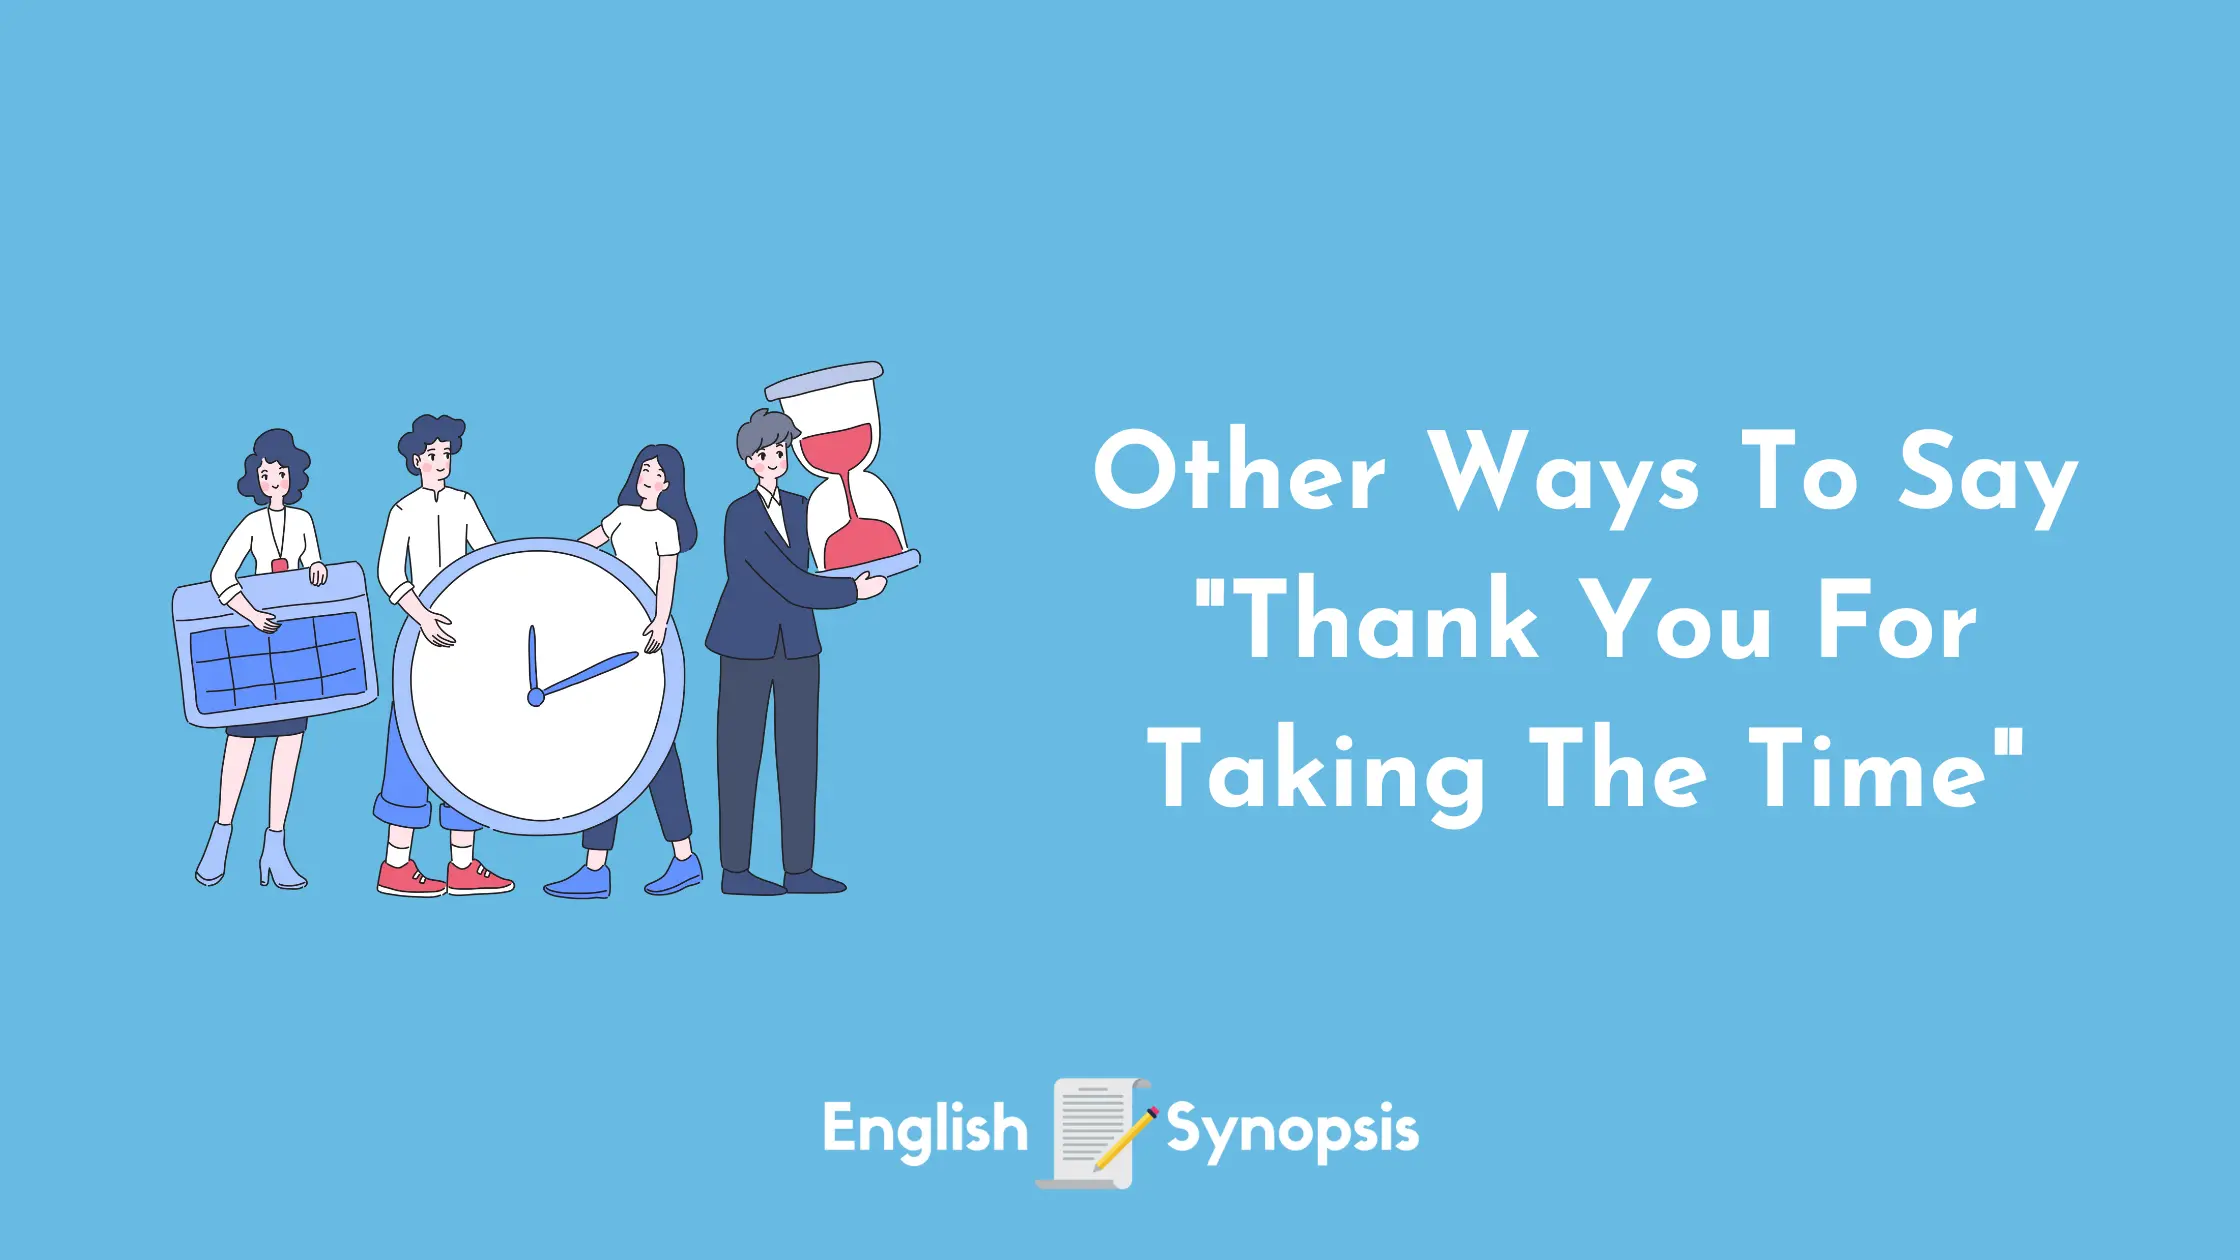 Other Ways To Say "Thank You For Taking The Time"